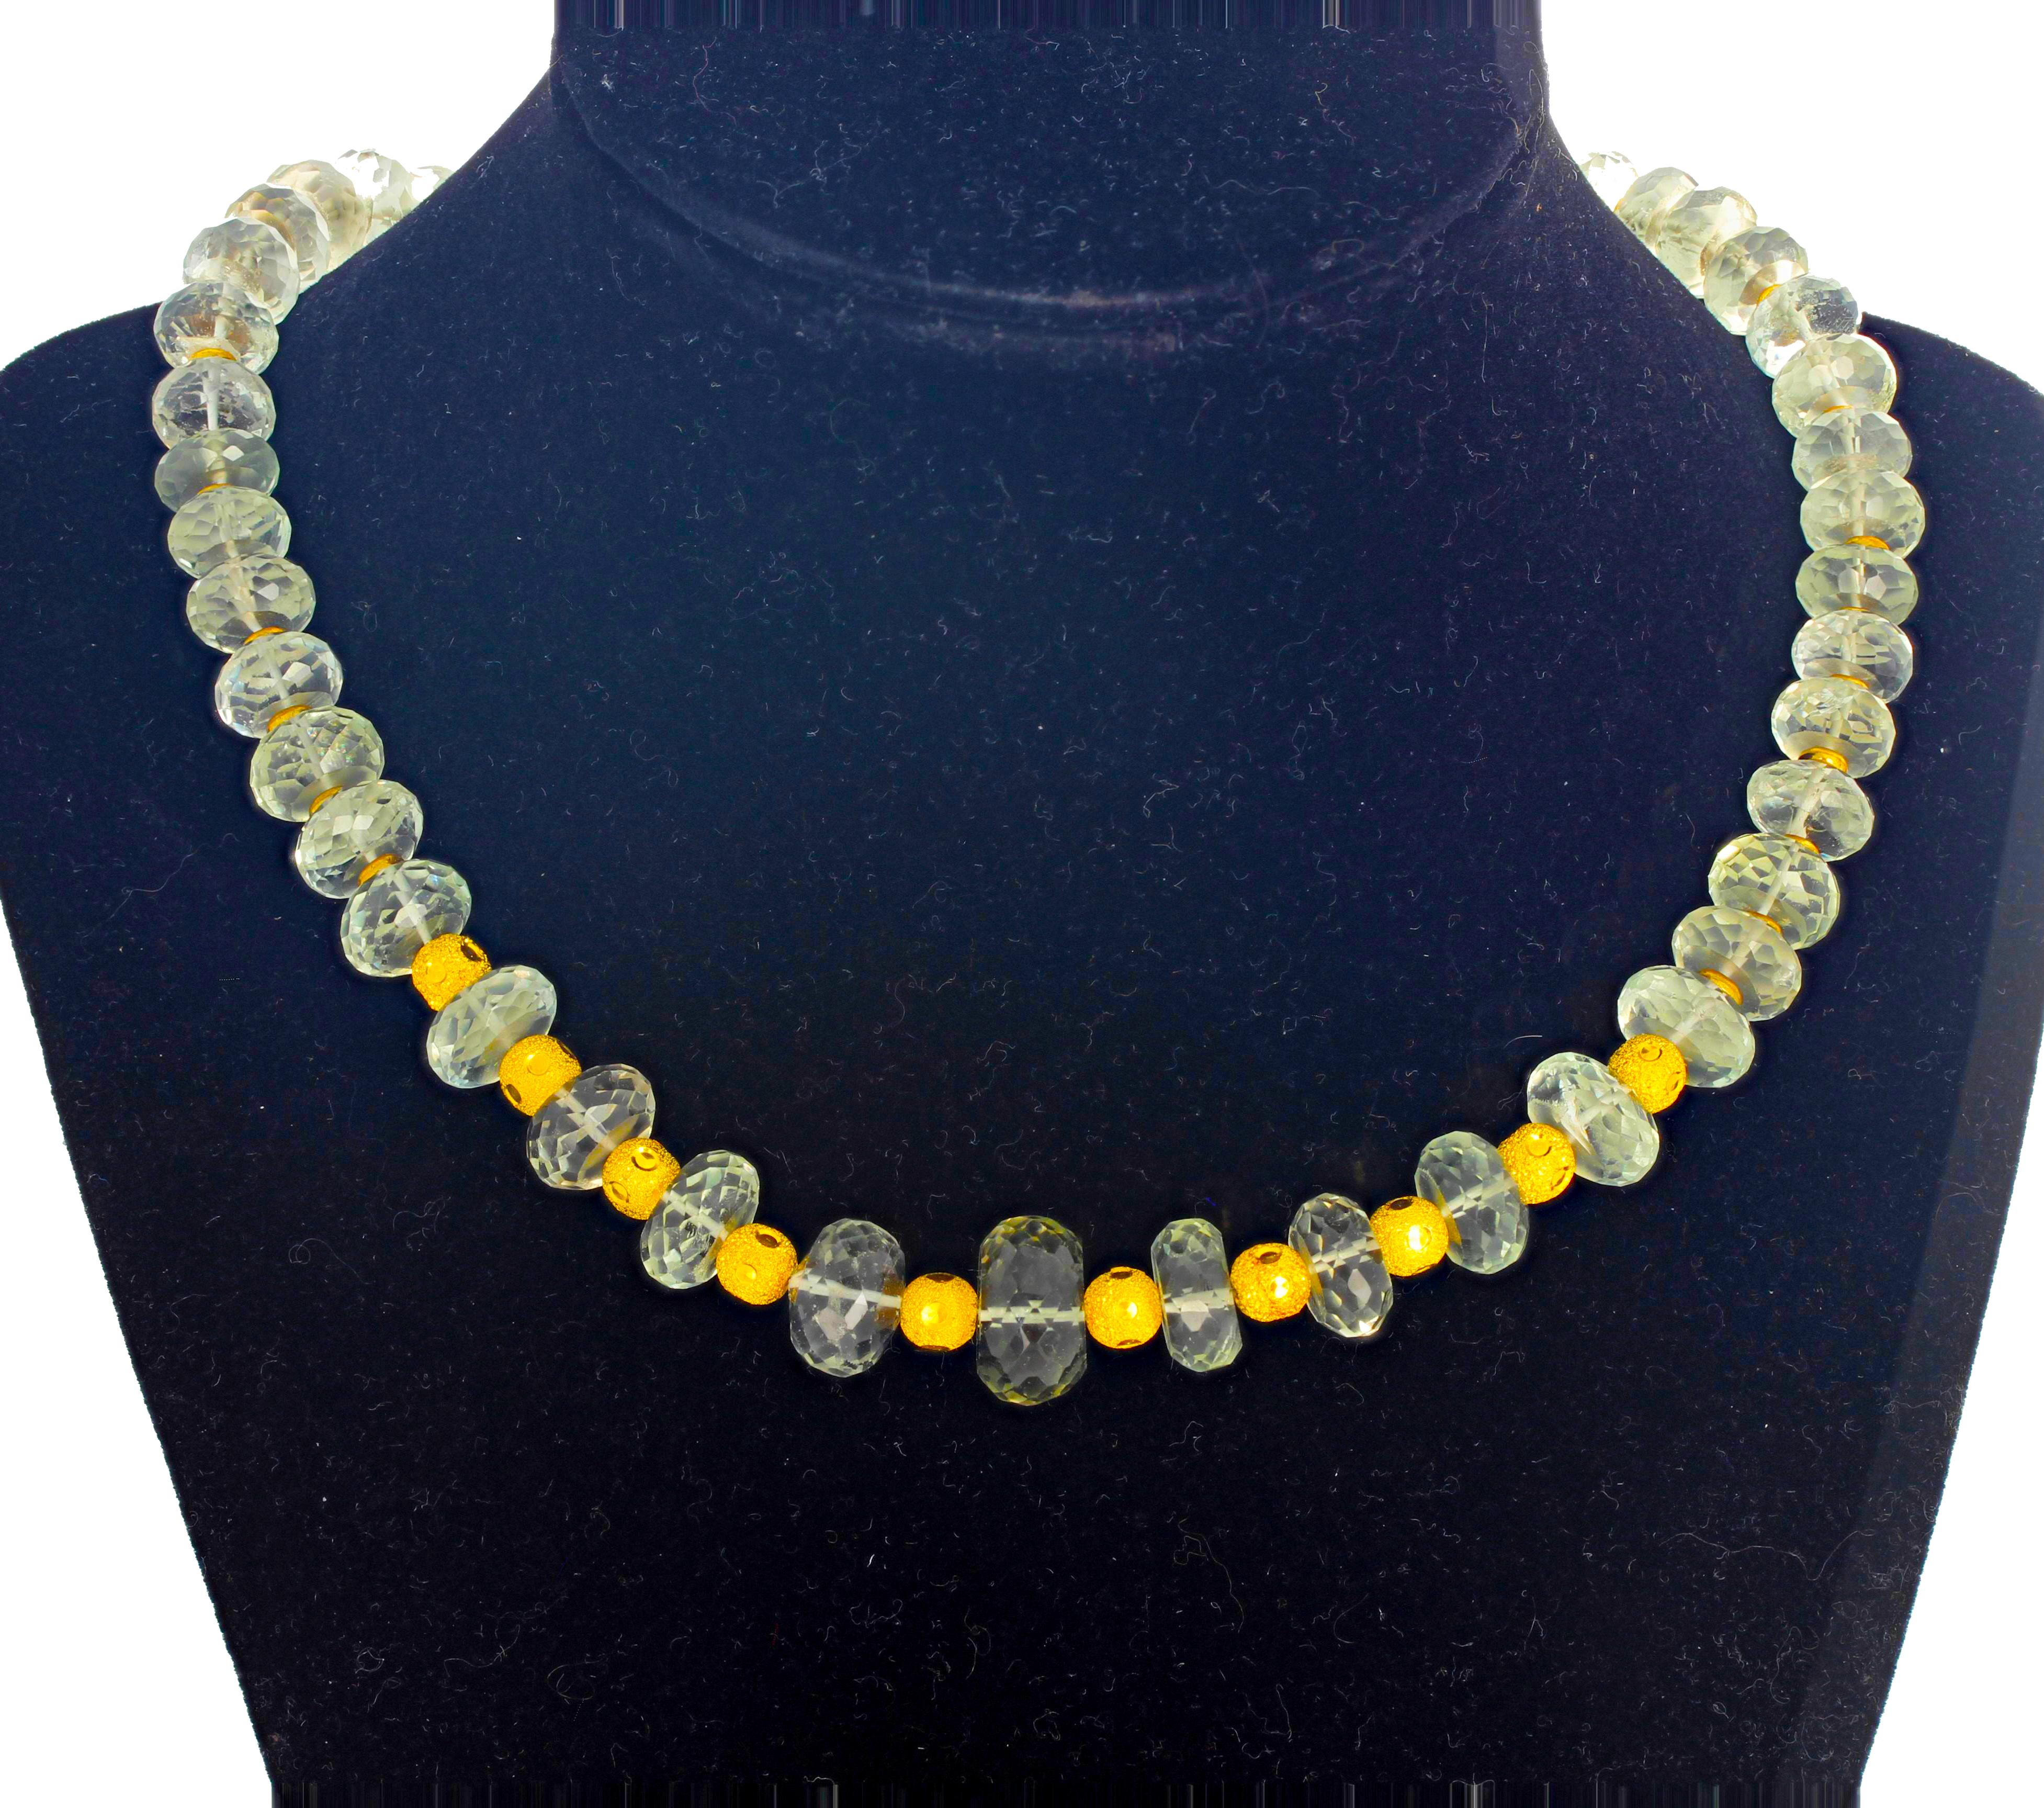 Checkerboard gemcut glittering brilliant pale green natural Praziolite Amethysts accented with gold plated sterling silver rondels set in this sparkling unique 16 inch long necklace with easy to use gold tone hook clasp.  The largest Praziolite is